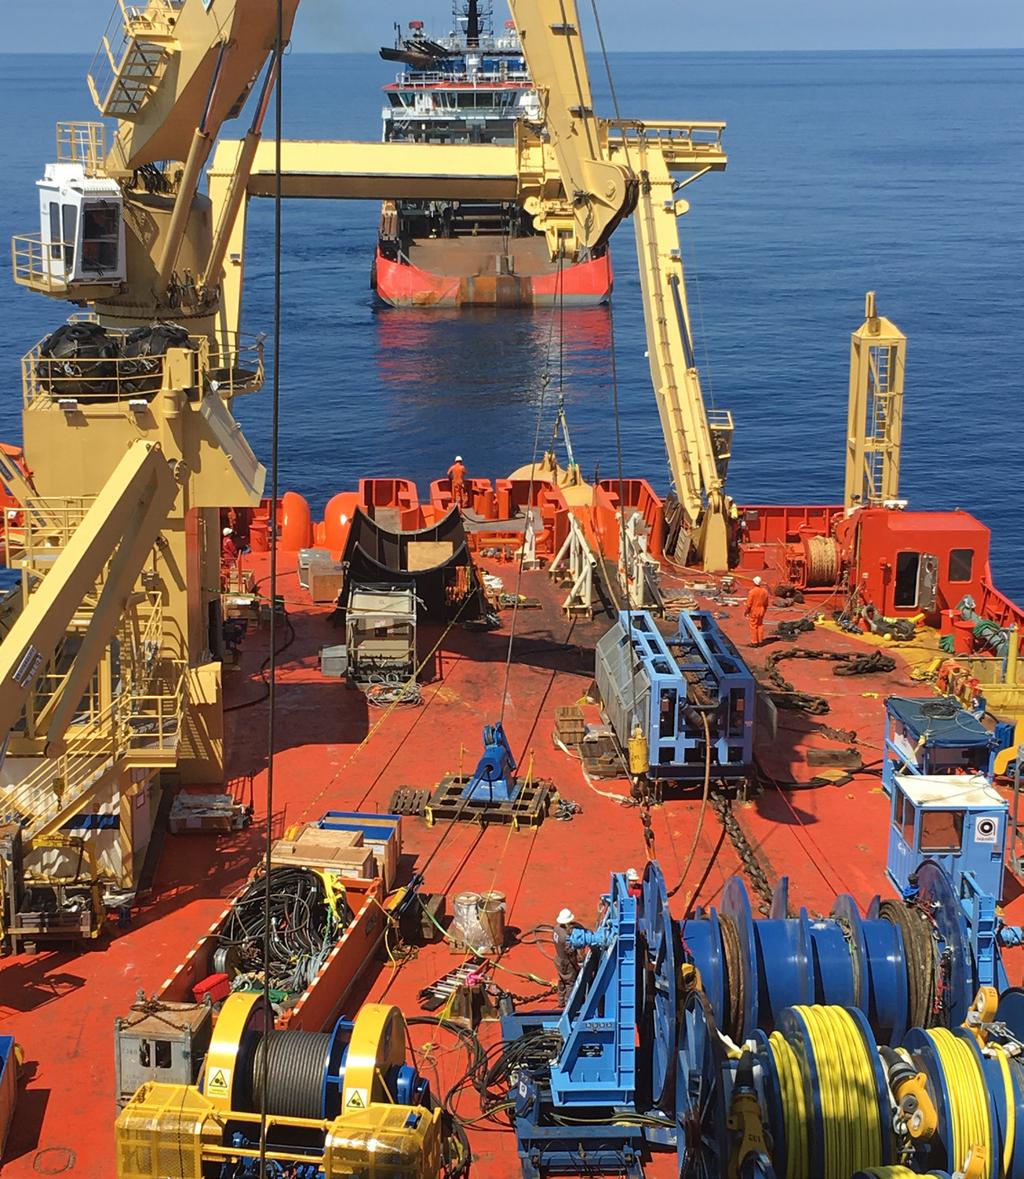 OFFSHORE EXPERTISE We know the depth of our offshore expertise. We are passionate about providing our customers with superior service quality.